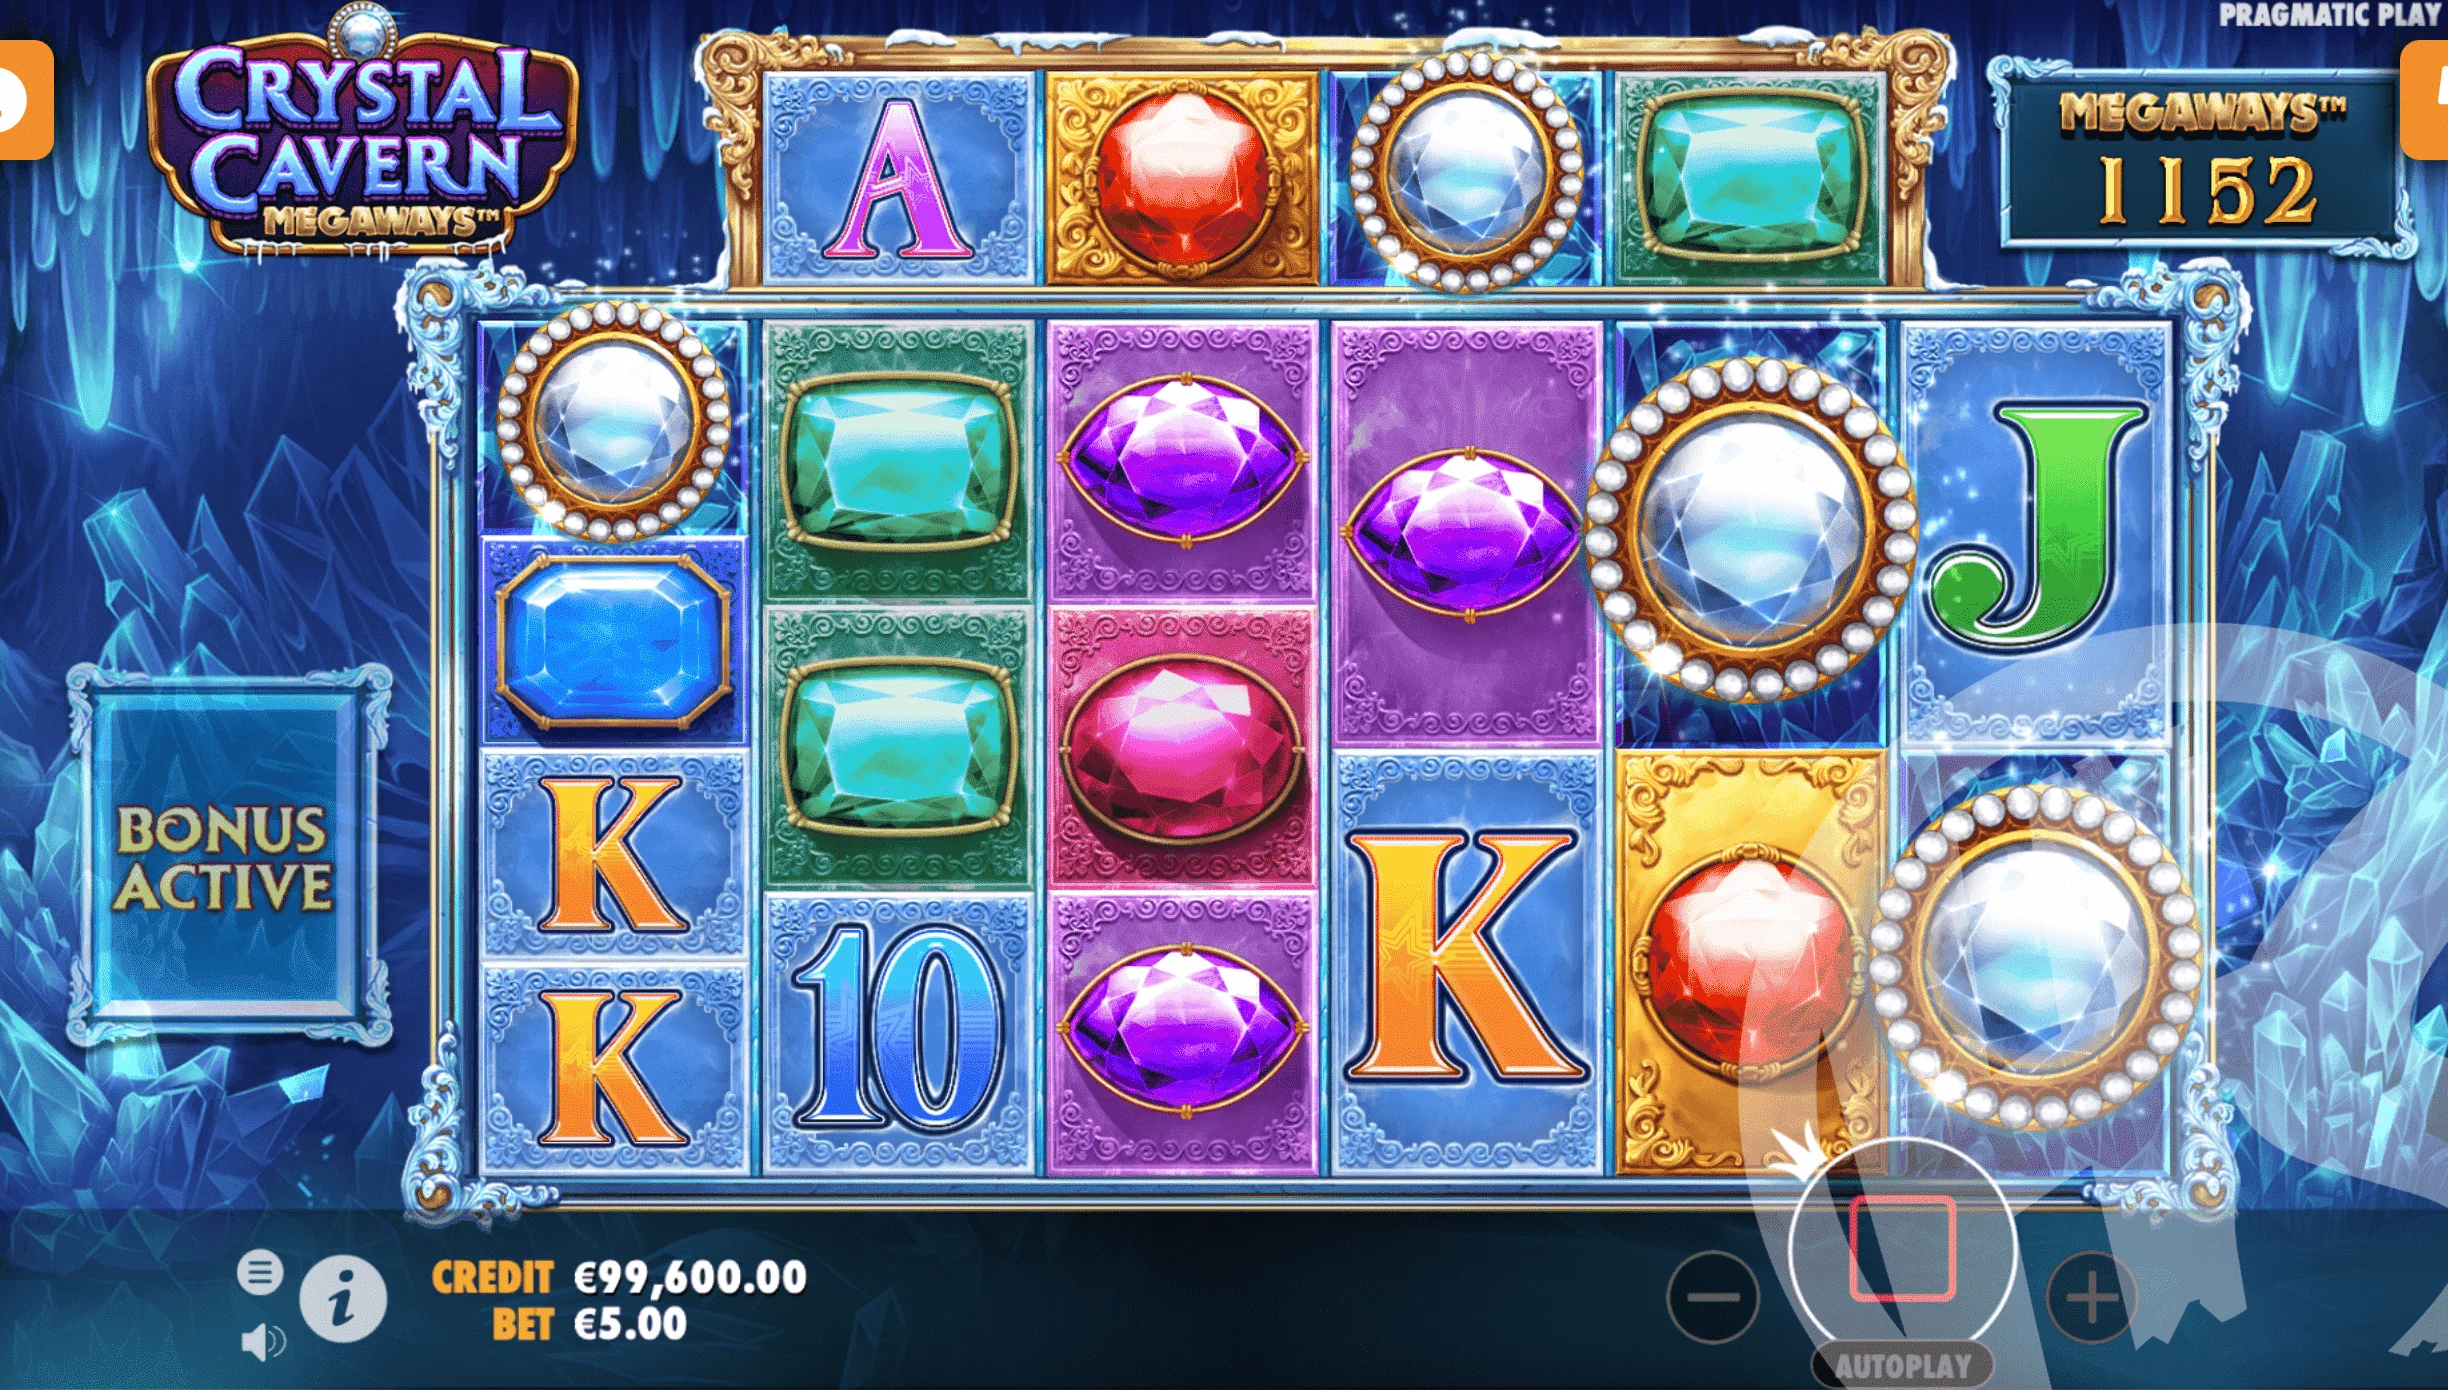 4 or More Scatters Trigger Free Spins